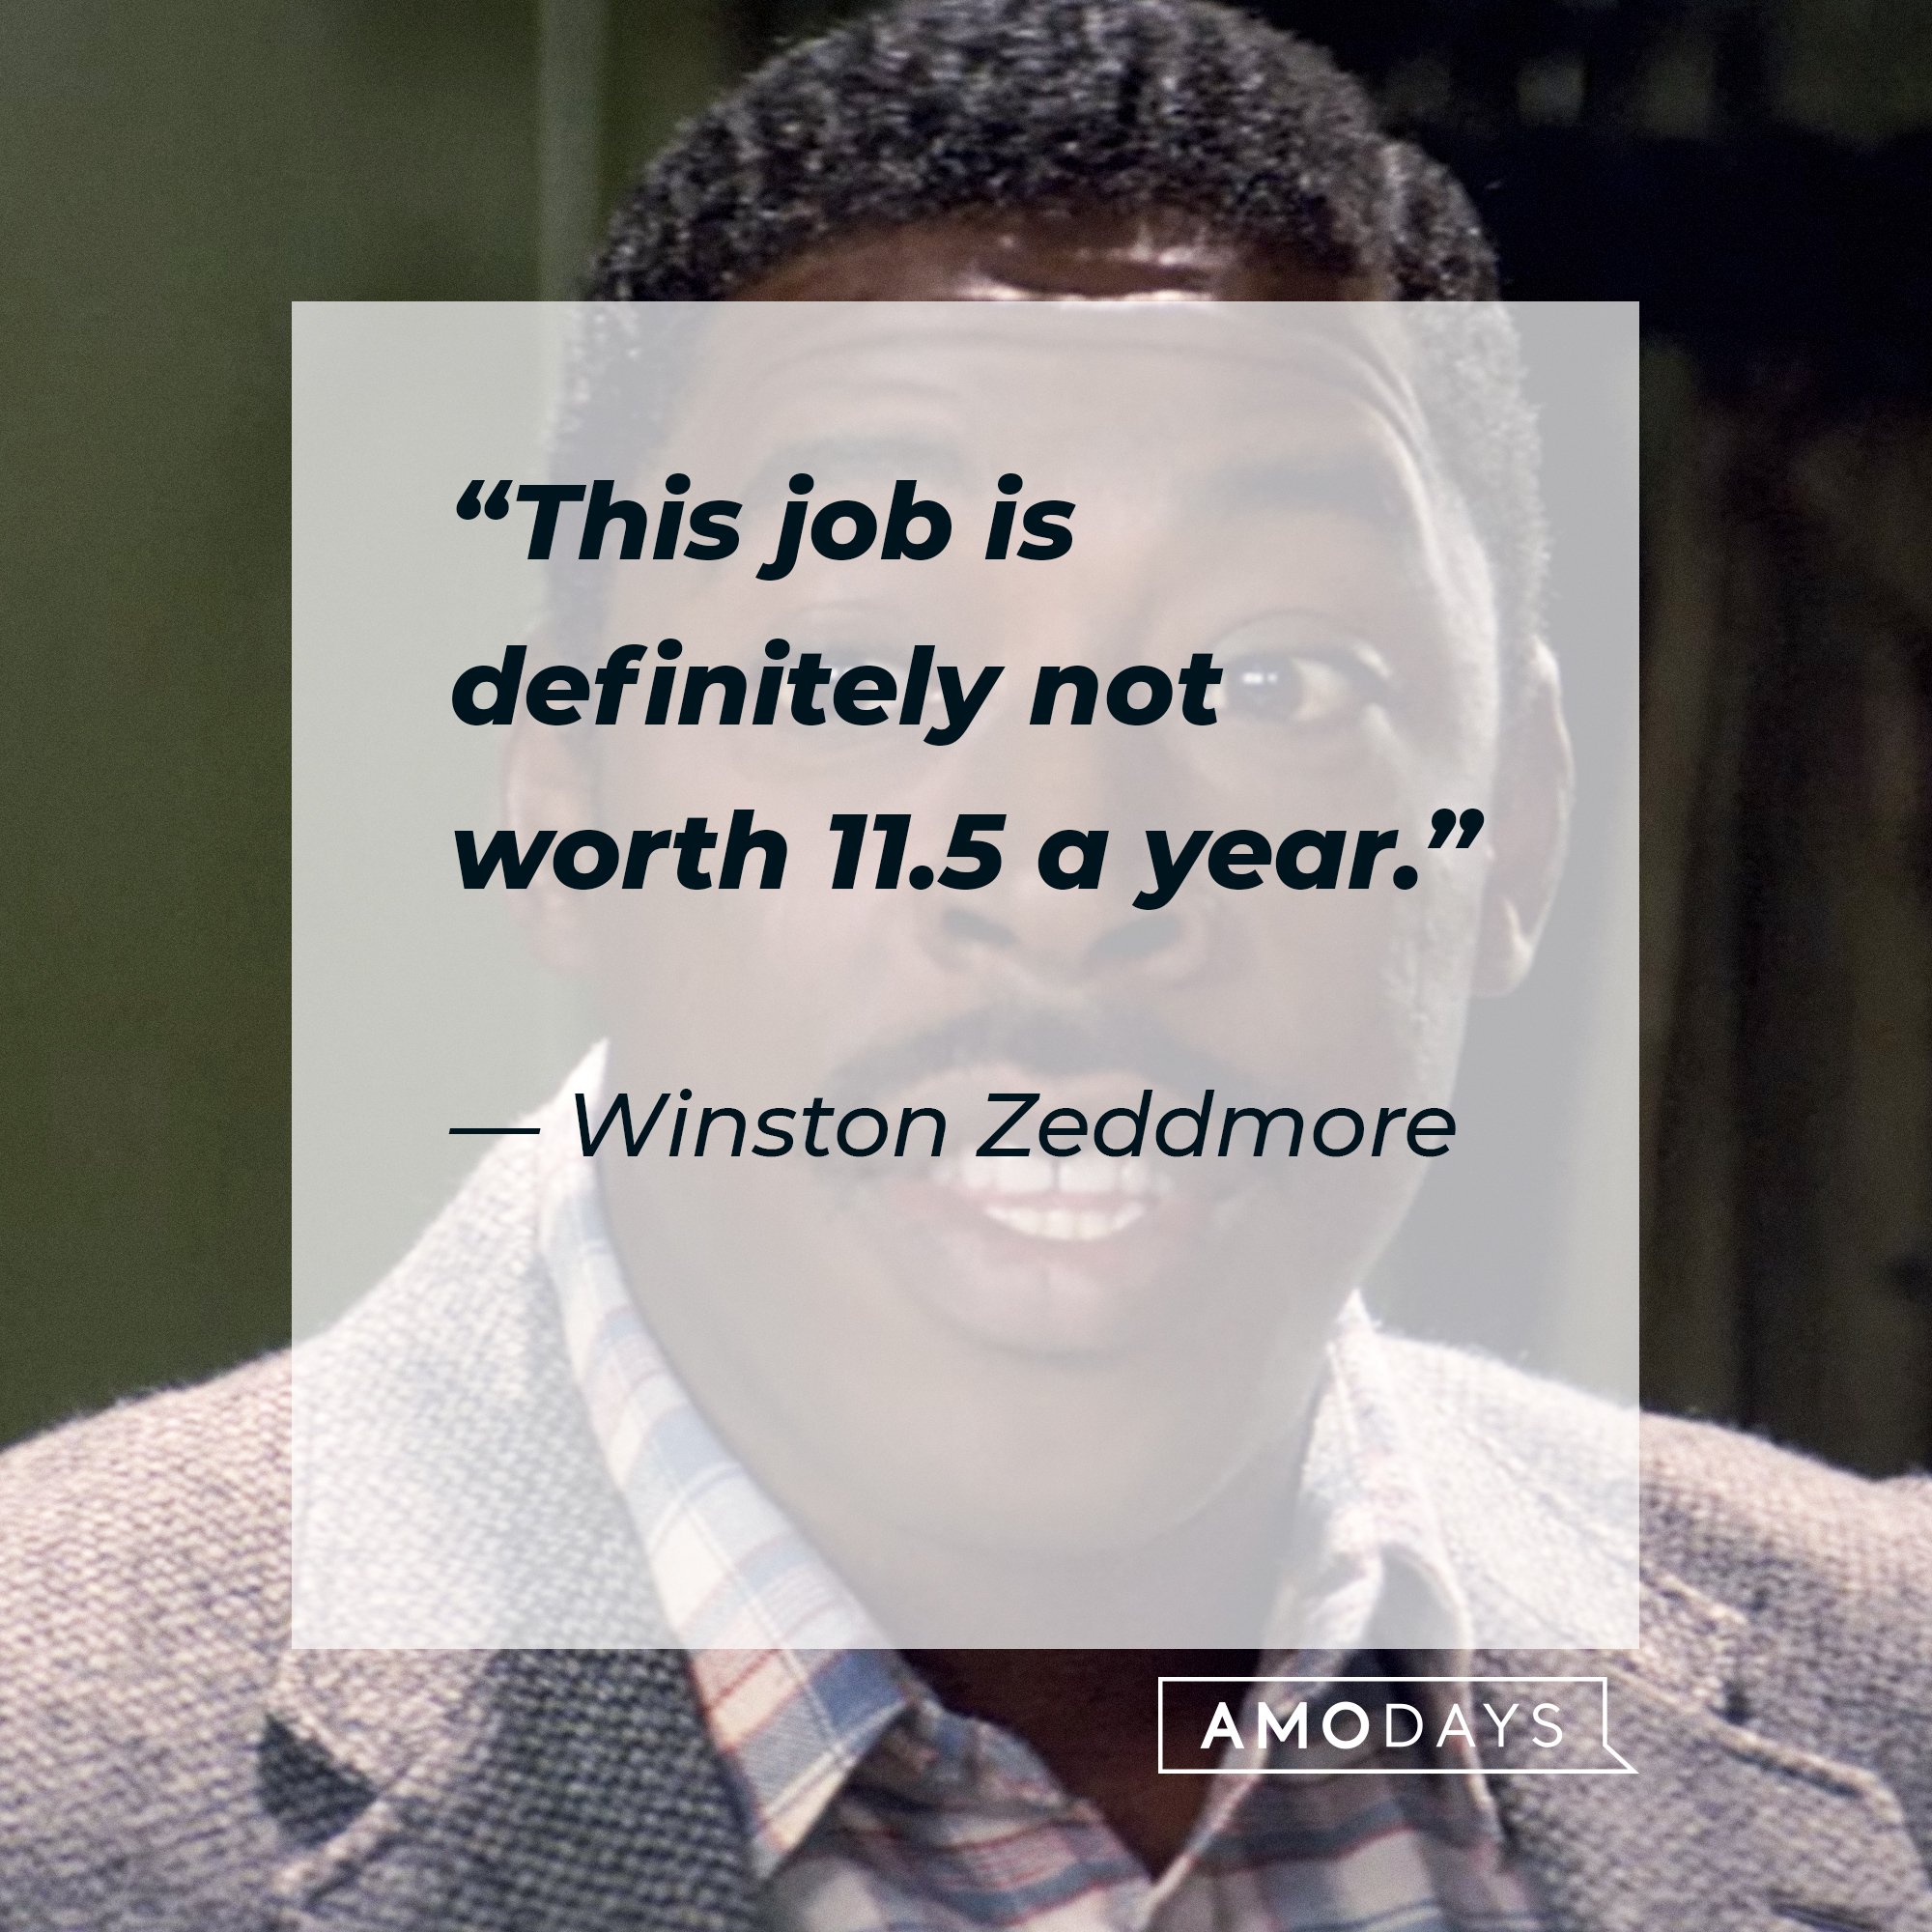  Winston Zeddmore's quote: “This job is definitely not worth 11.5 a year.” | Image: AmoDays